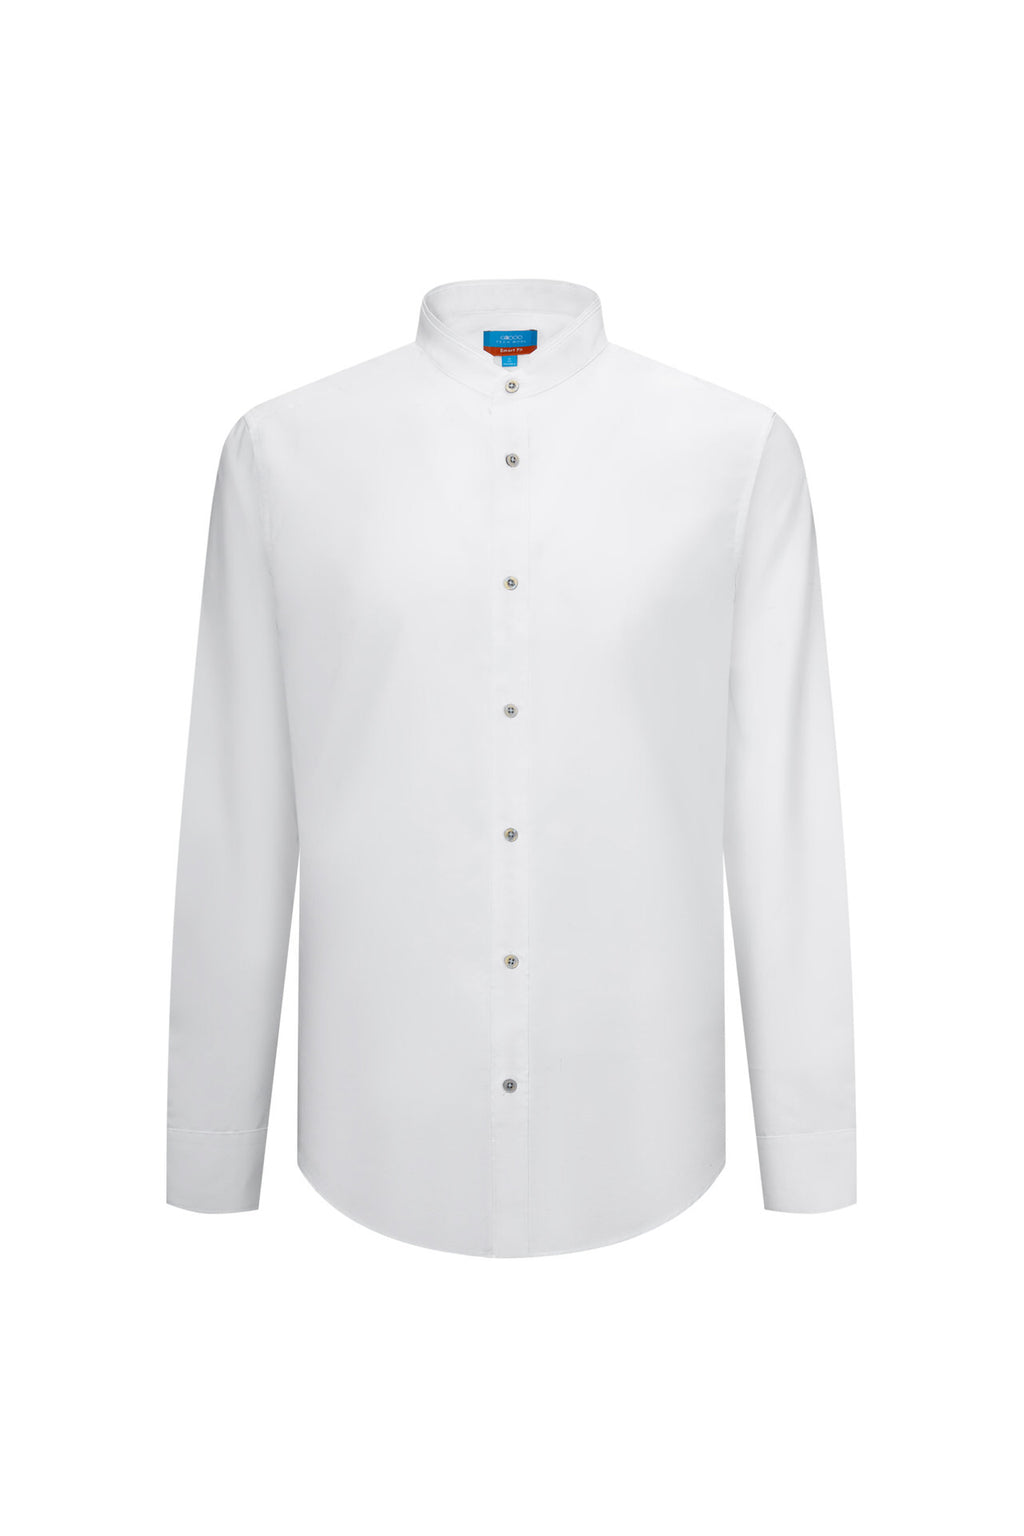 Buy G2000 Stand Collar Dry Shirt 2024 Online